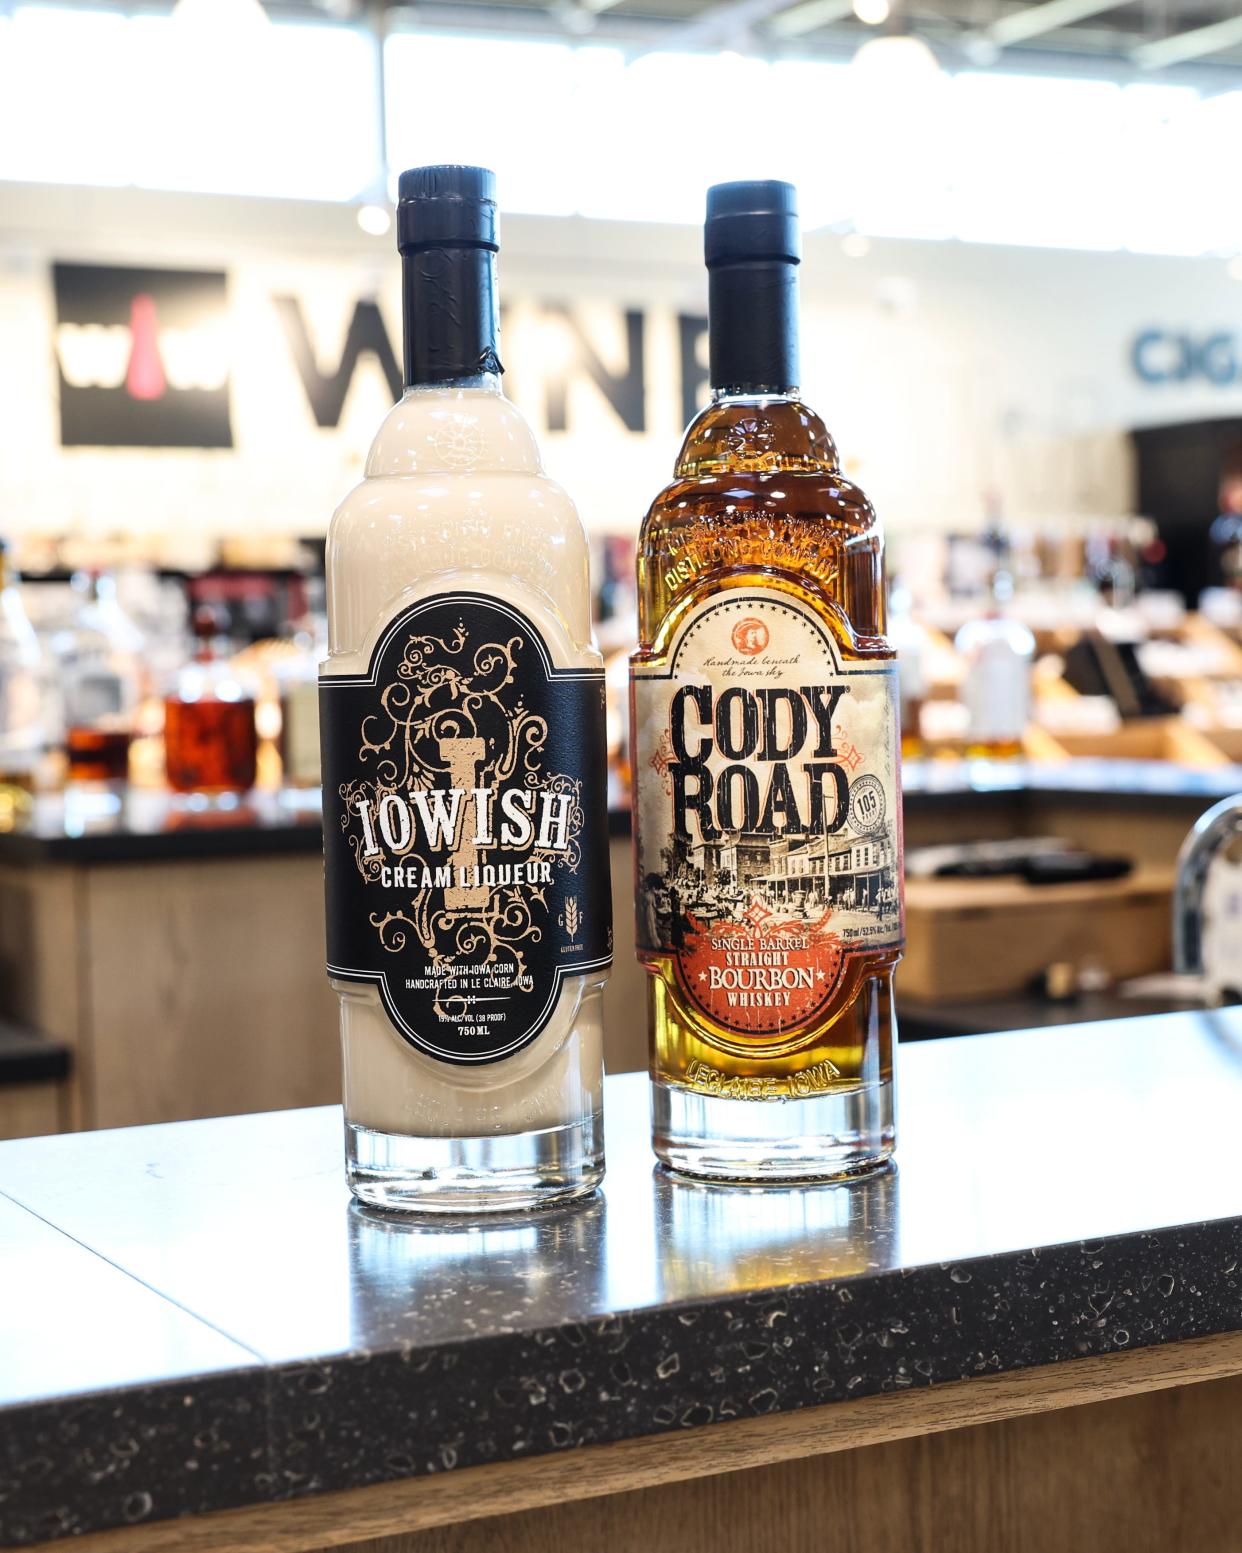 Mississippi River Distilling in LeClaire, Iowa, offers spirits using the Iowish and Cody Road names. Wall to Wall Wine & Spirits in West Des Moines carries a selection of Iowa spirits, including those from Mississippi River Distilling.